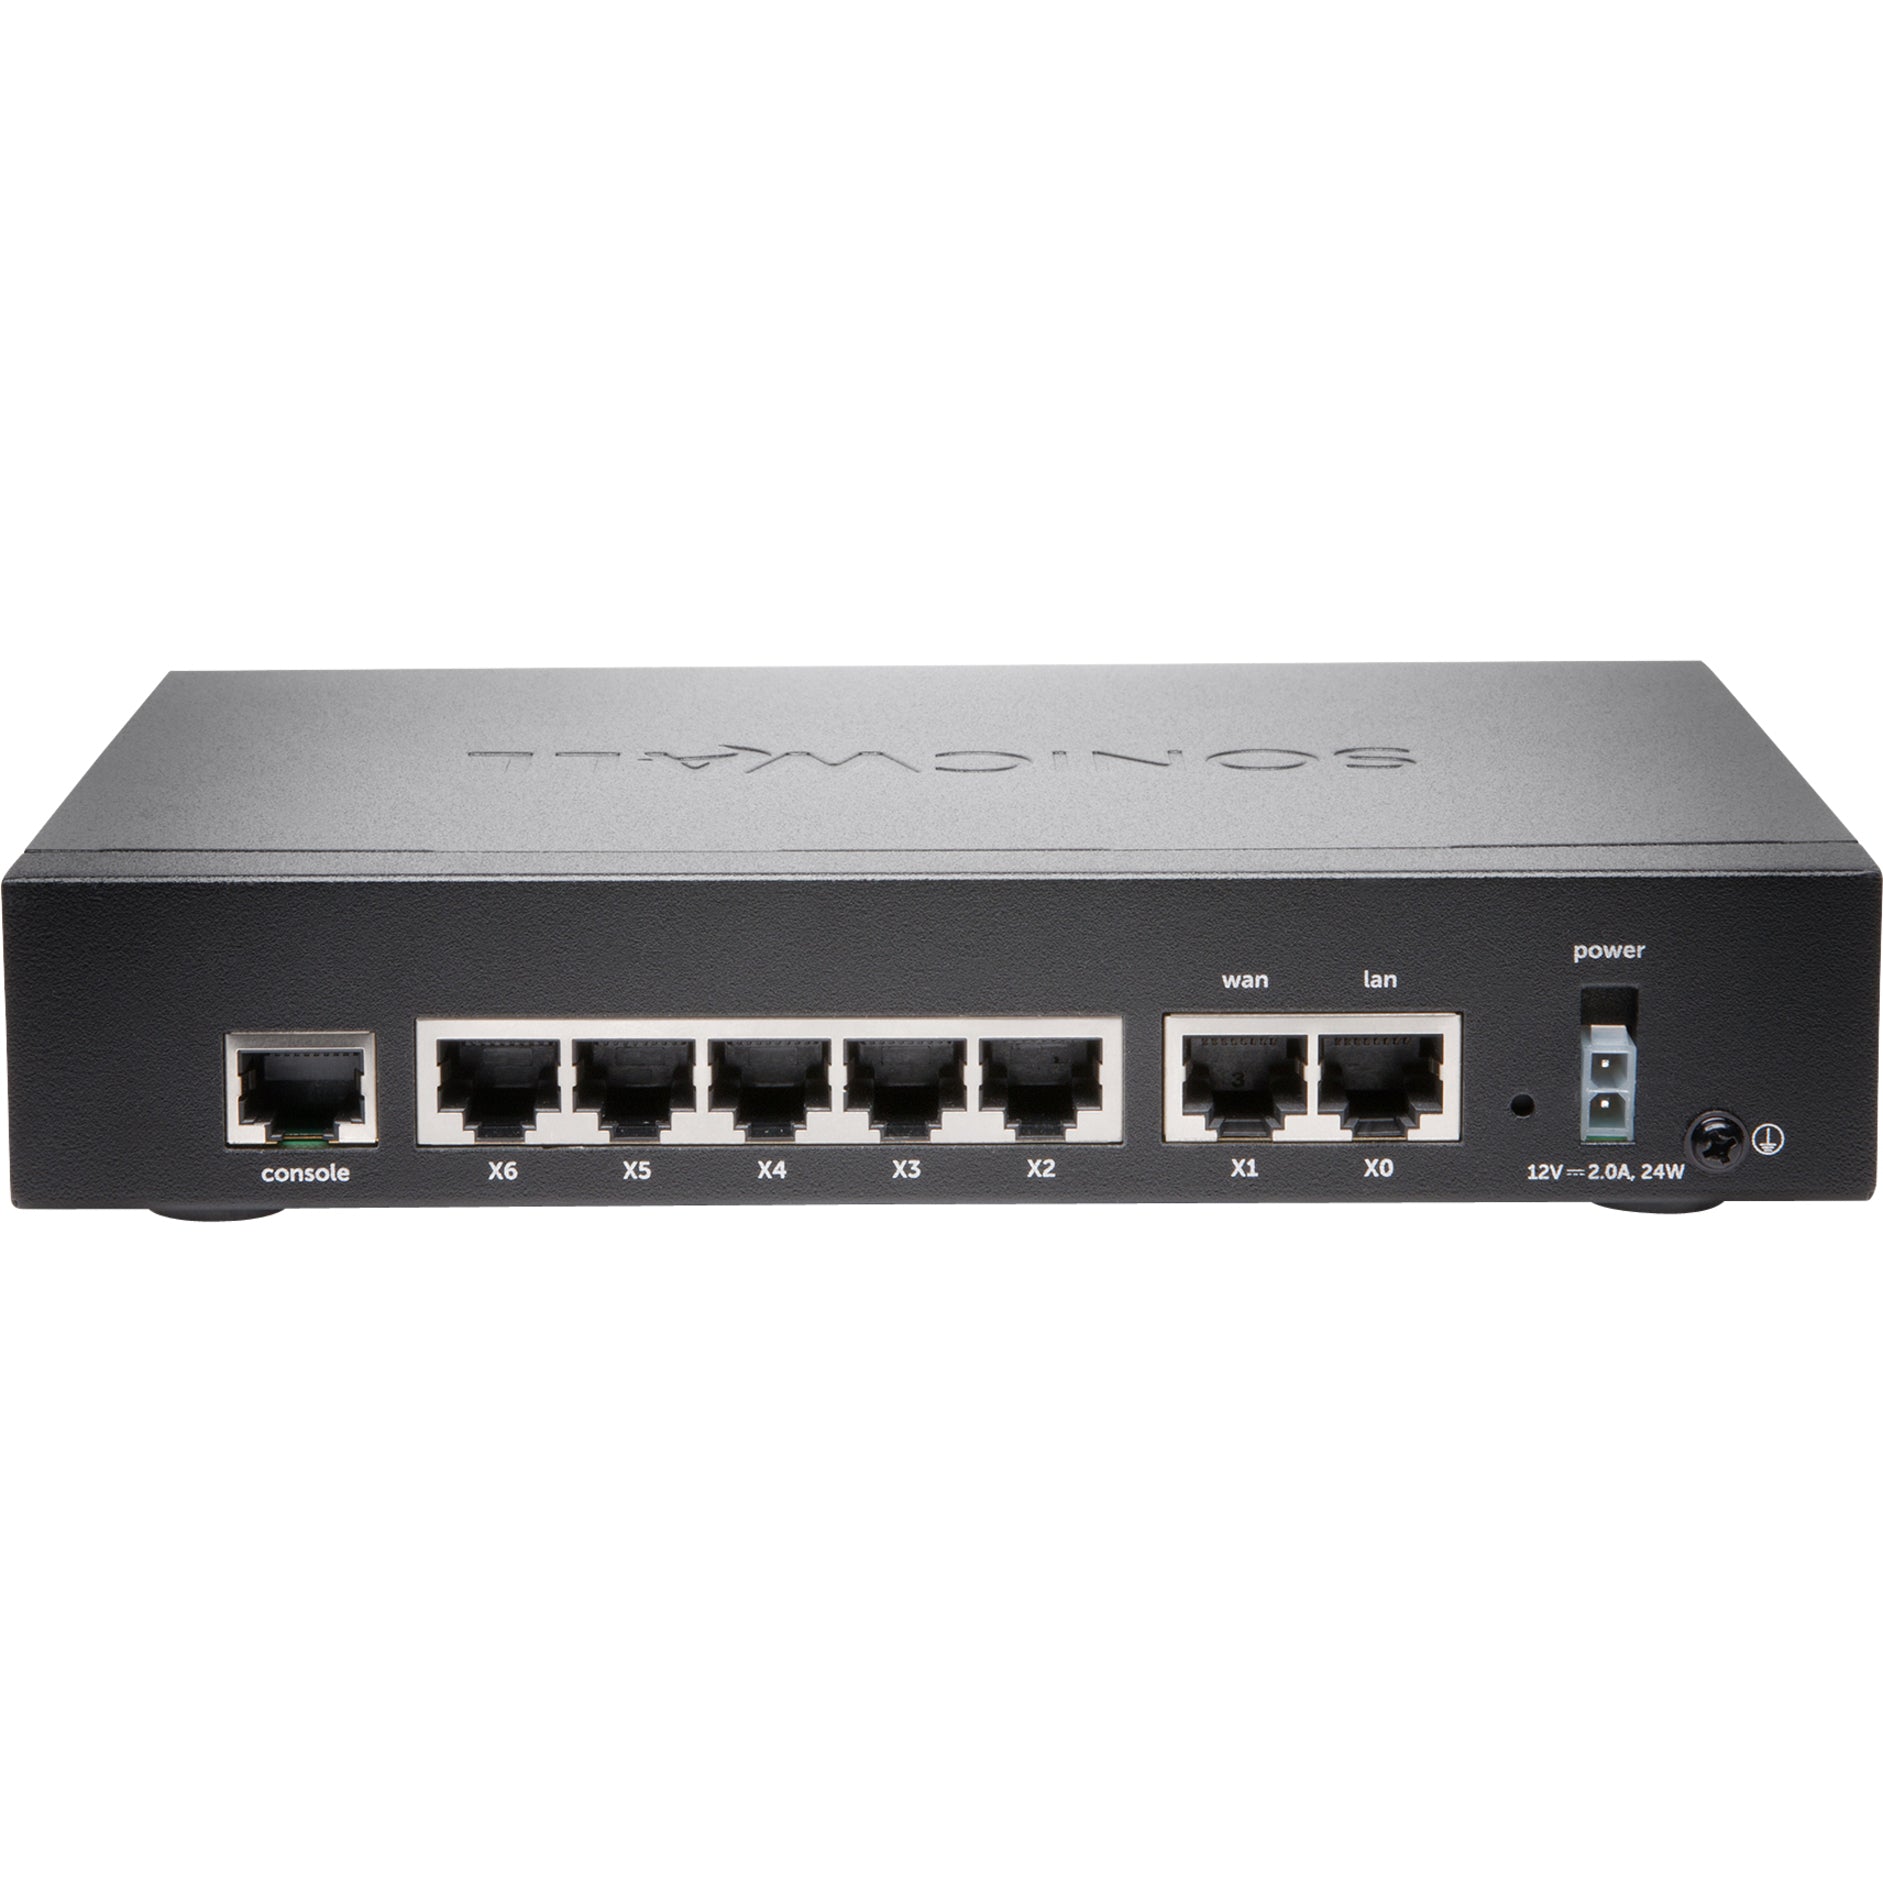 SonicWall TZ400 Network Security/Firewall Appliance [Discontinued]